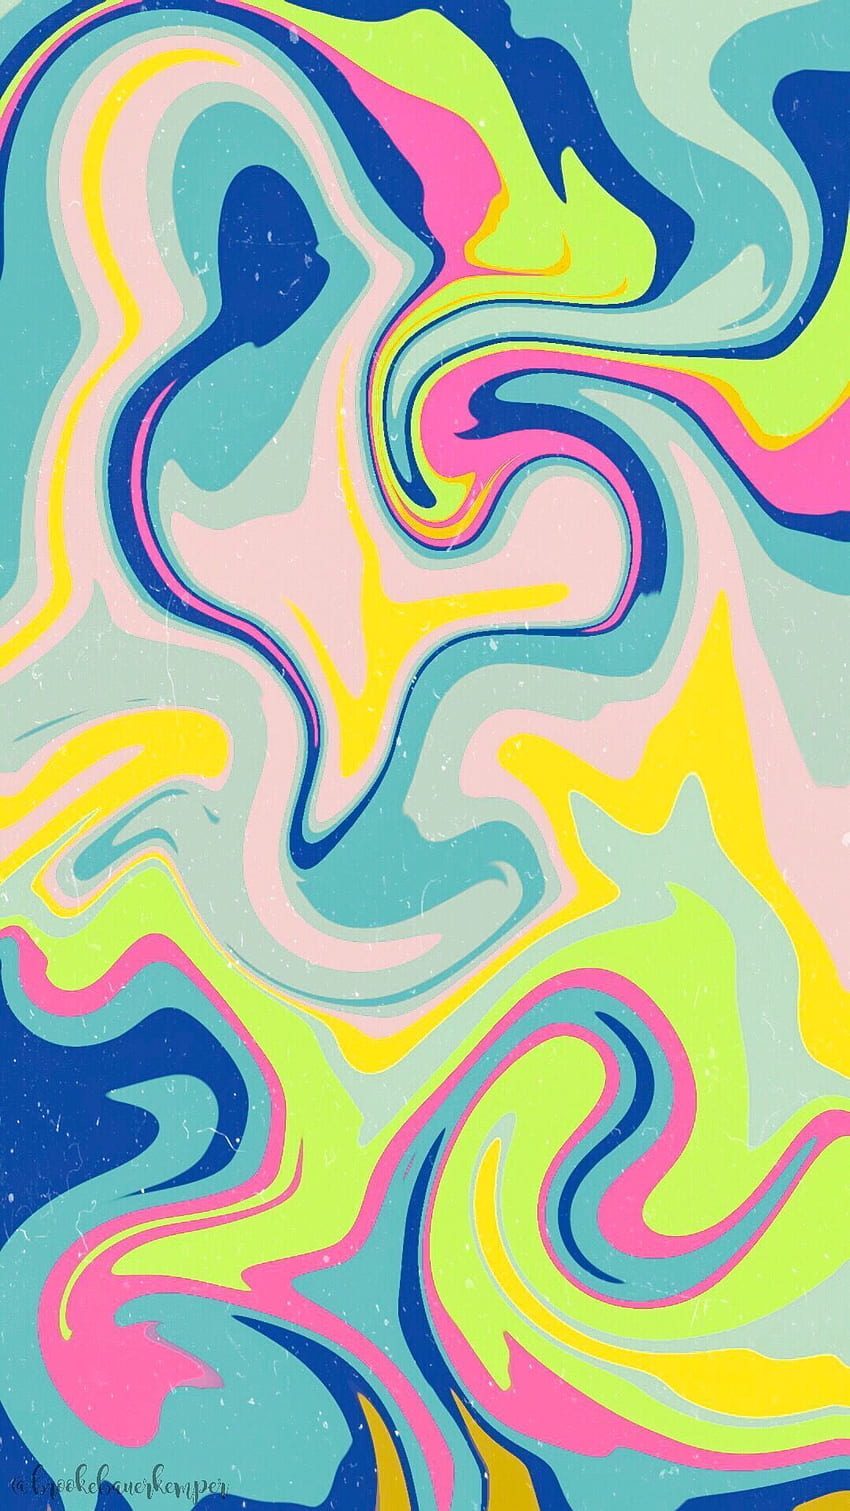 Aesthetic background with a swirled pattern of pink, blue, yellow, and green - VSCO